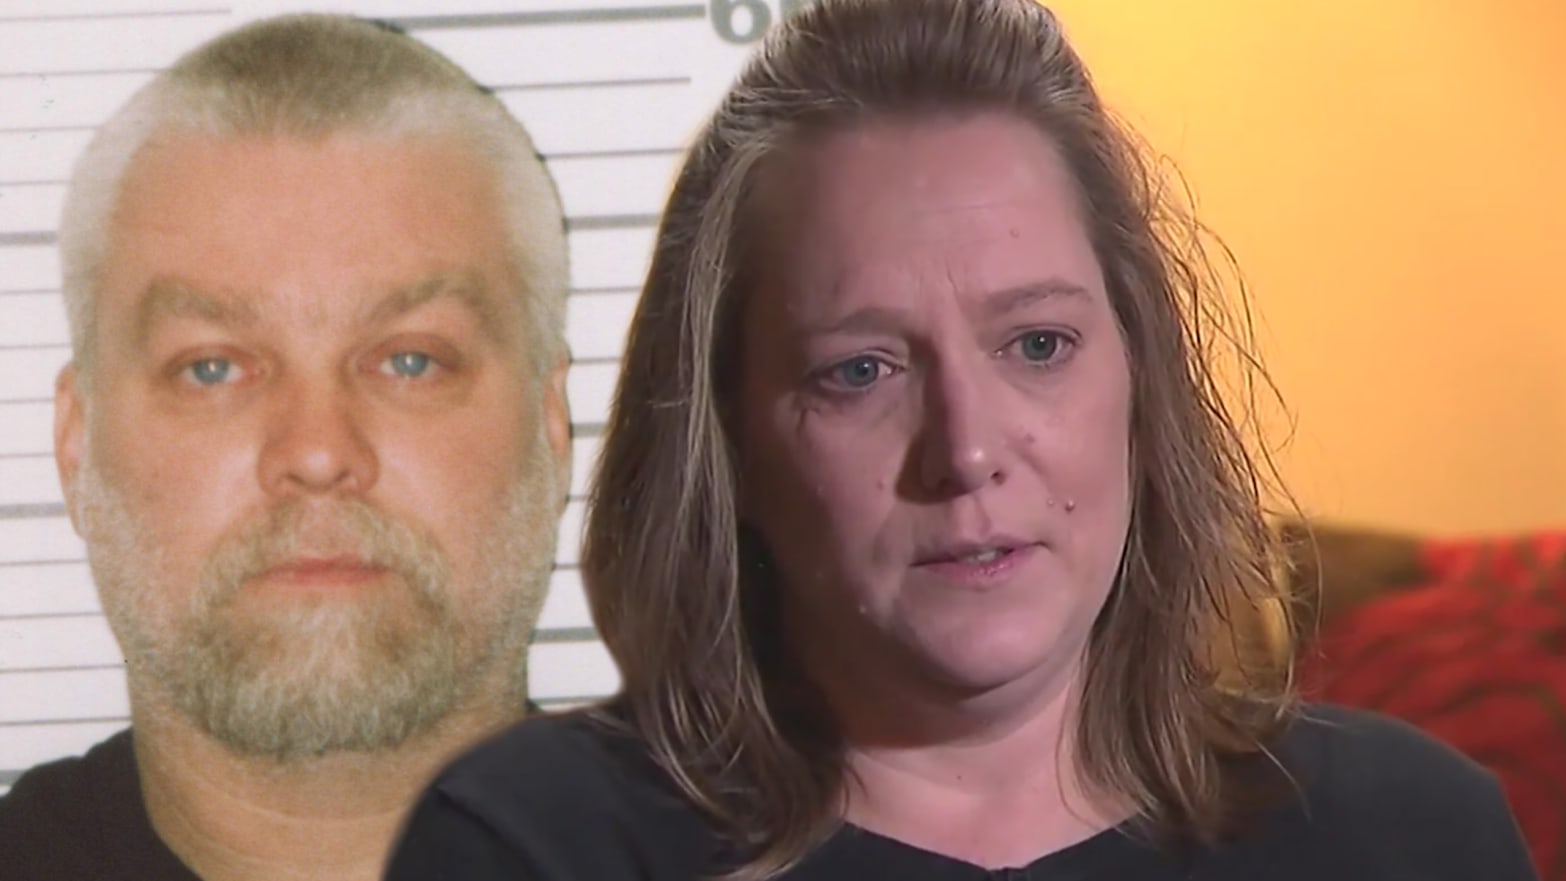 Making a Murderer': Steven Avery's Ex-Fiancée Claims 'Behind